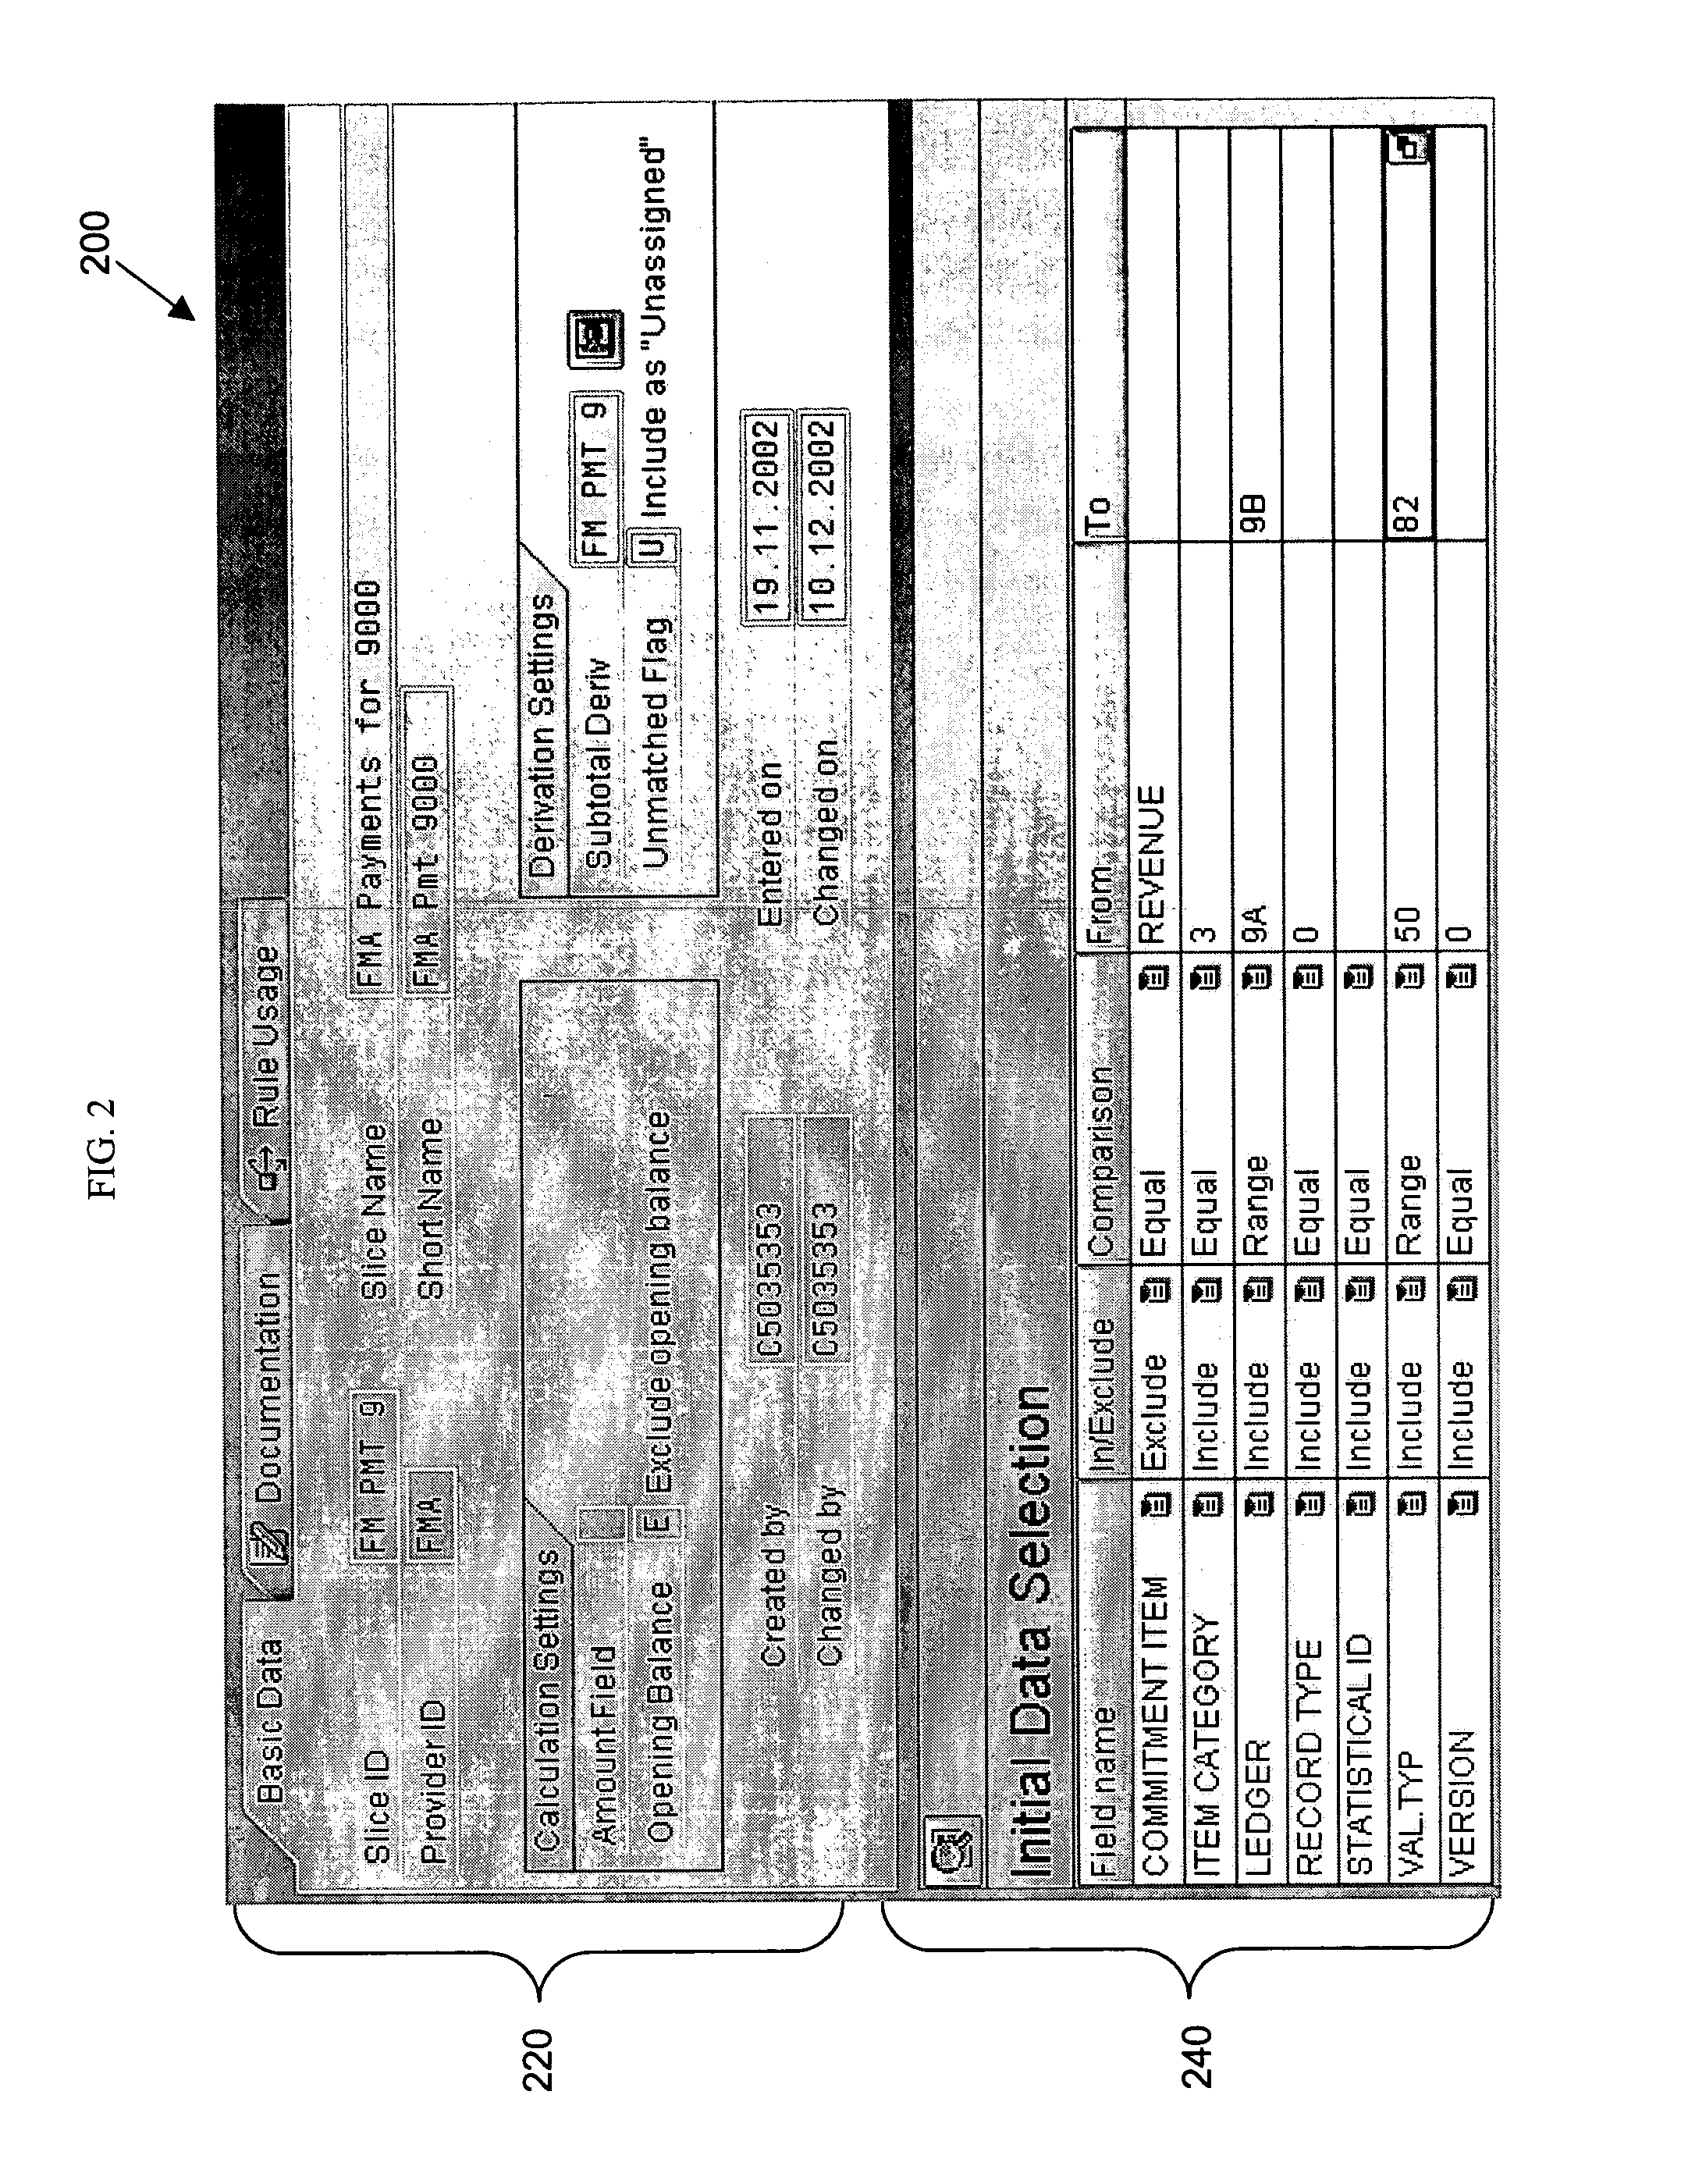 System and method for data reconciliation